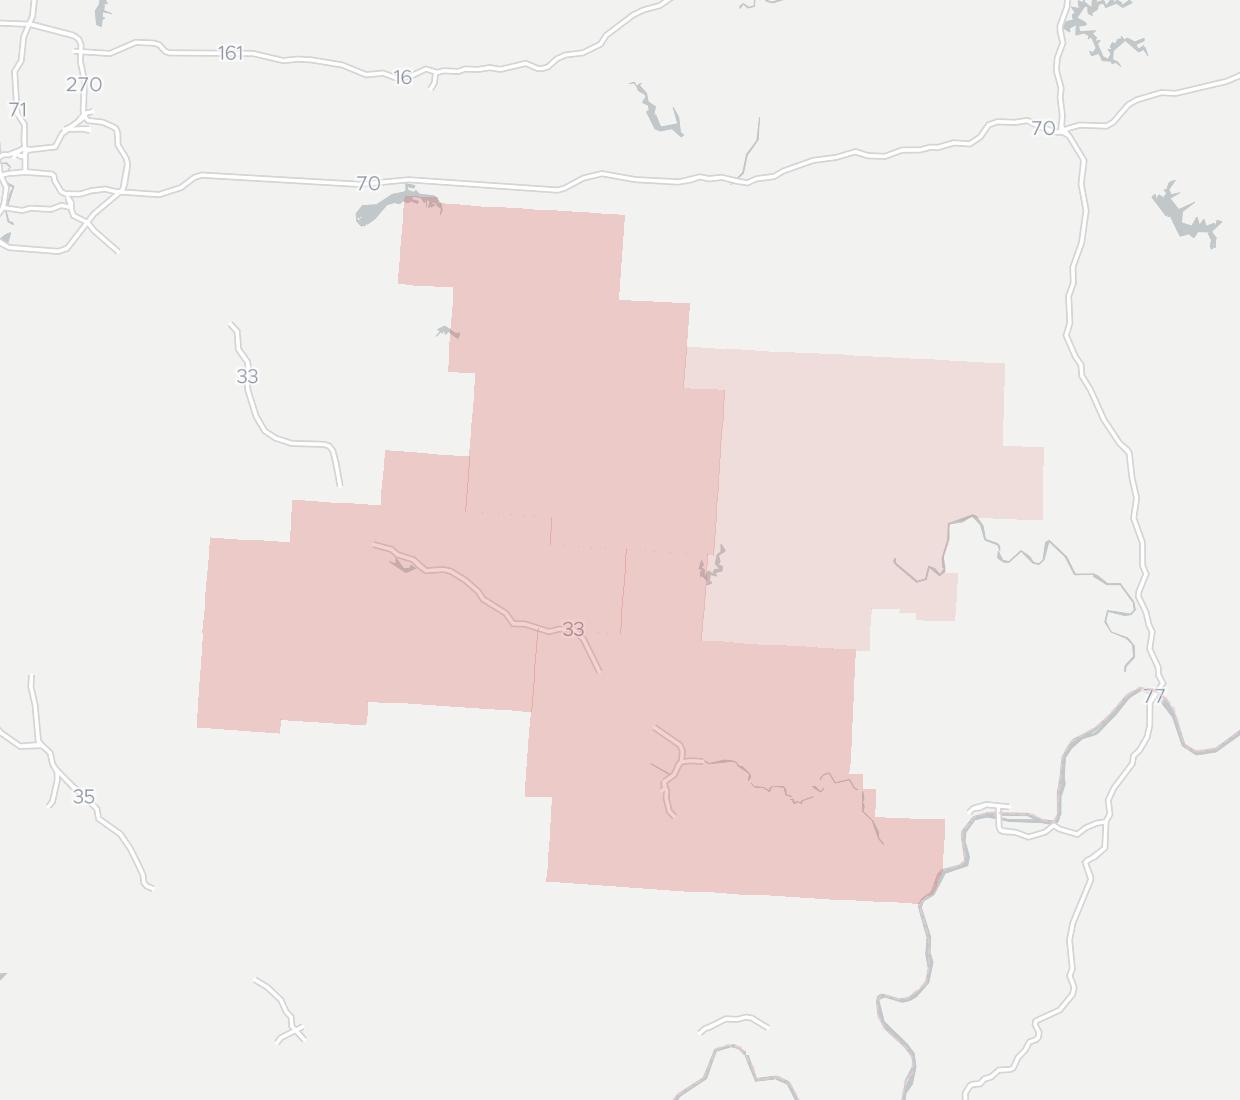 Nelsonville TV Cable Availability Map. Click for interactive map.